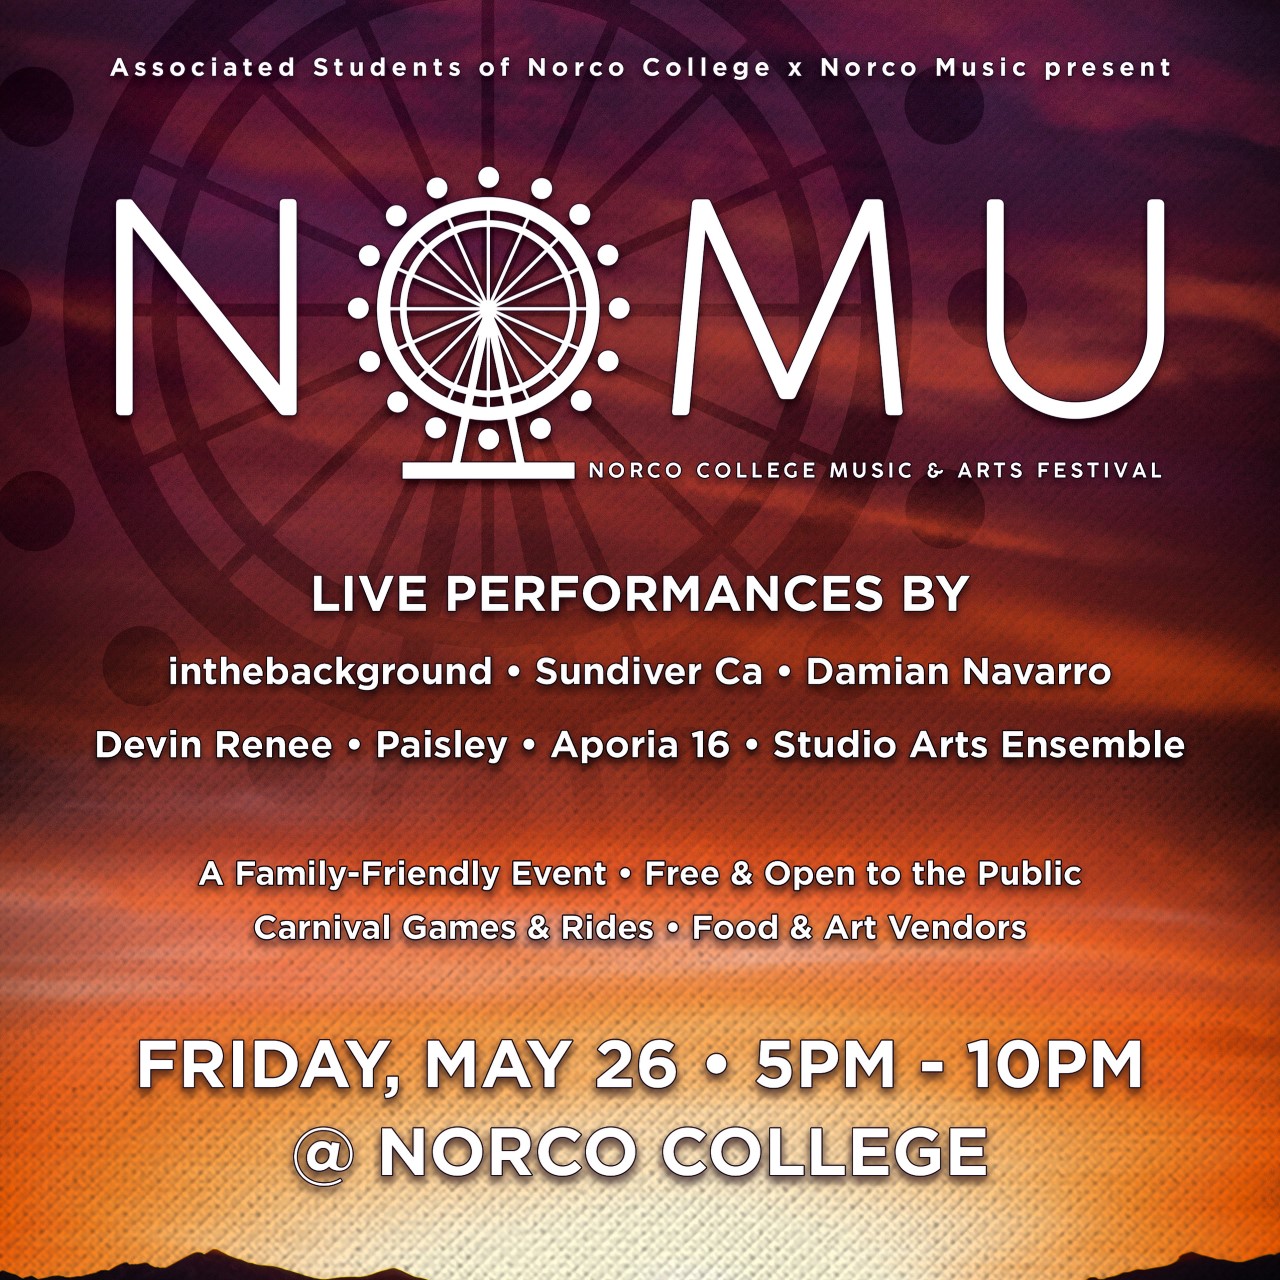 Norco College Music & Arts Festival 2.0 flyer